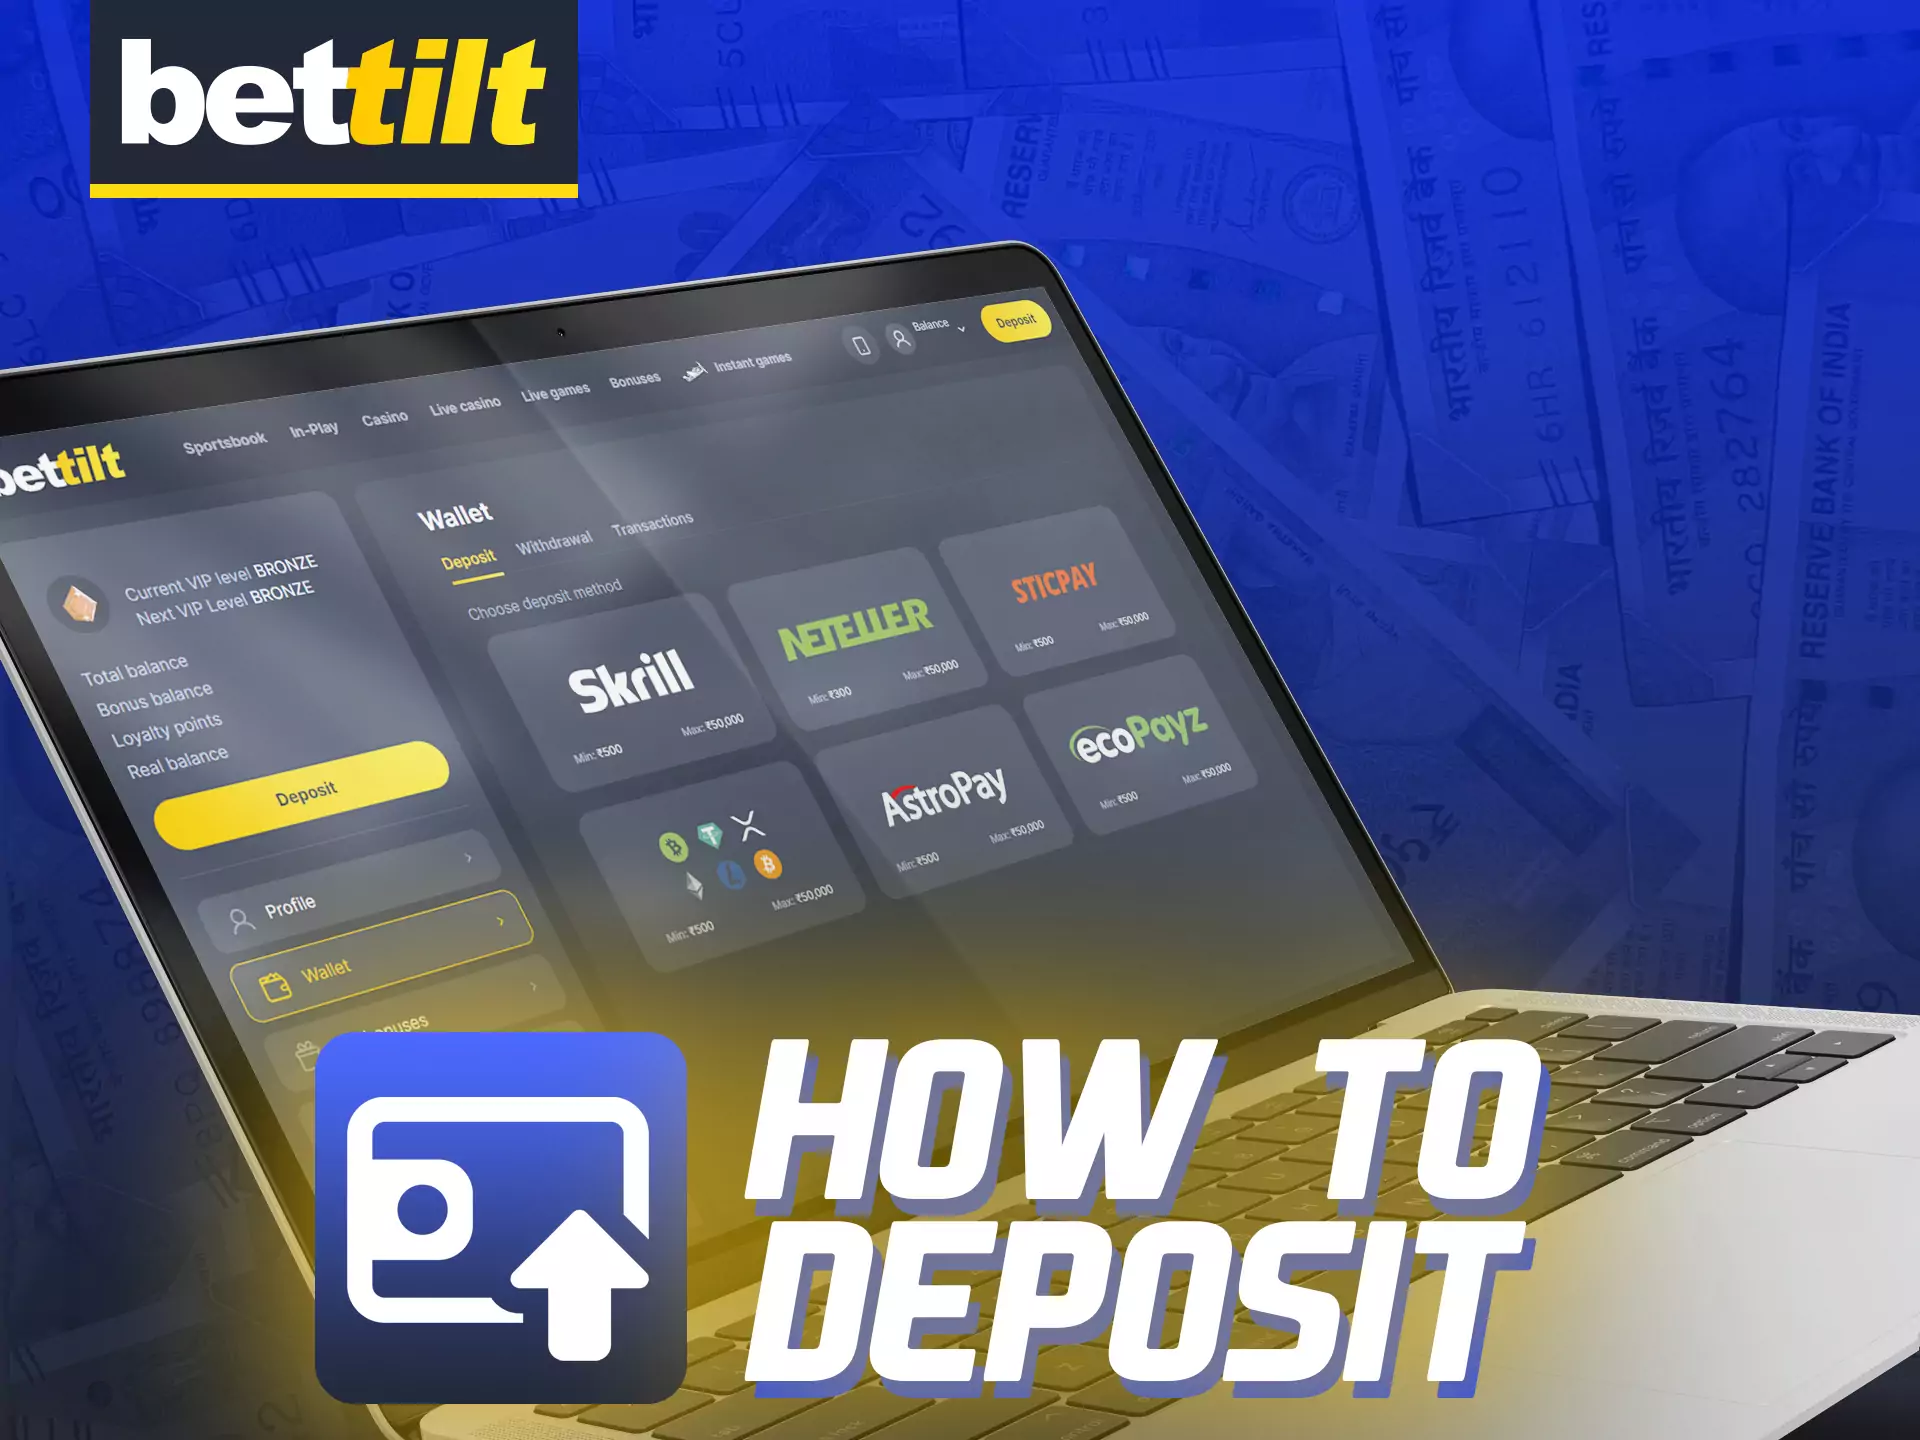 With these instructions, learn how to easily deposit on Bettilt.